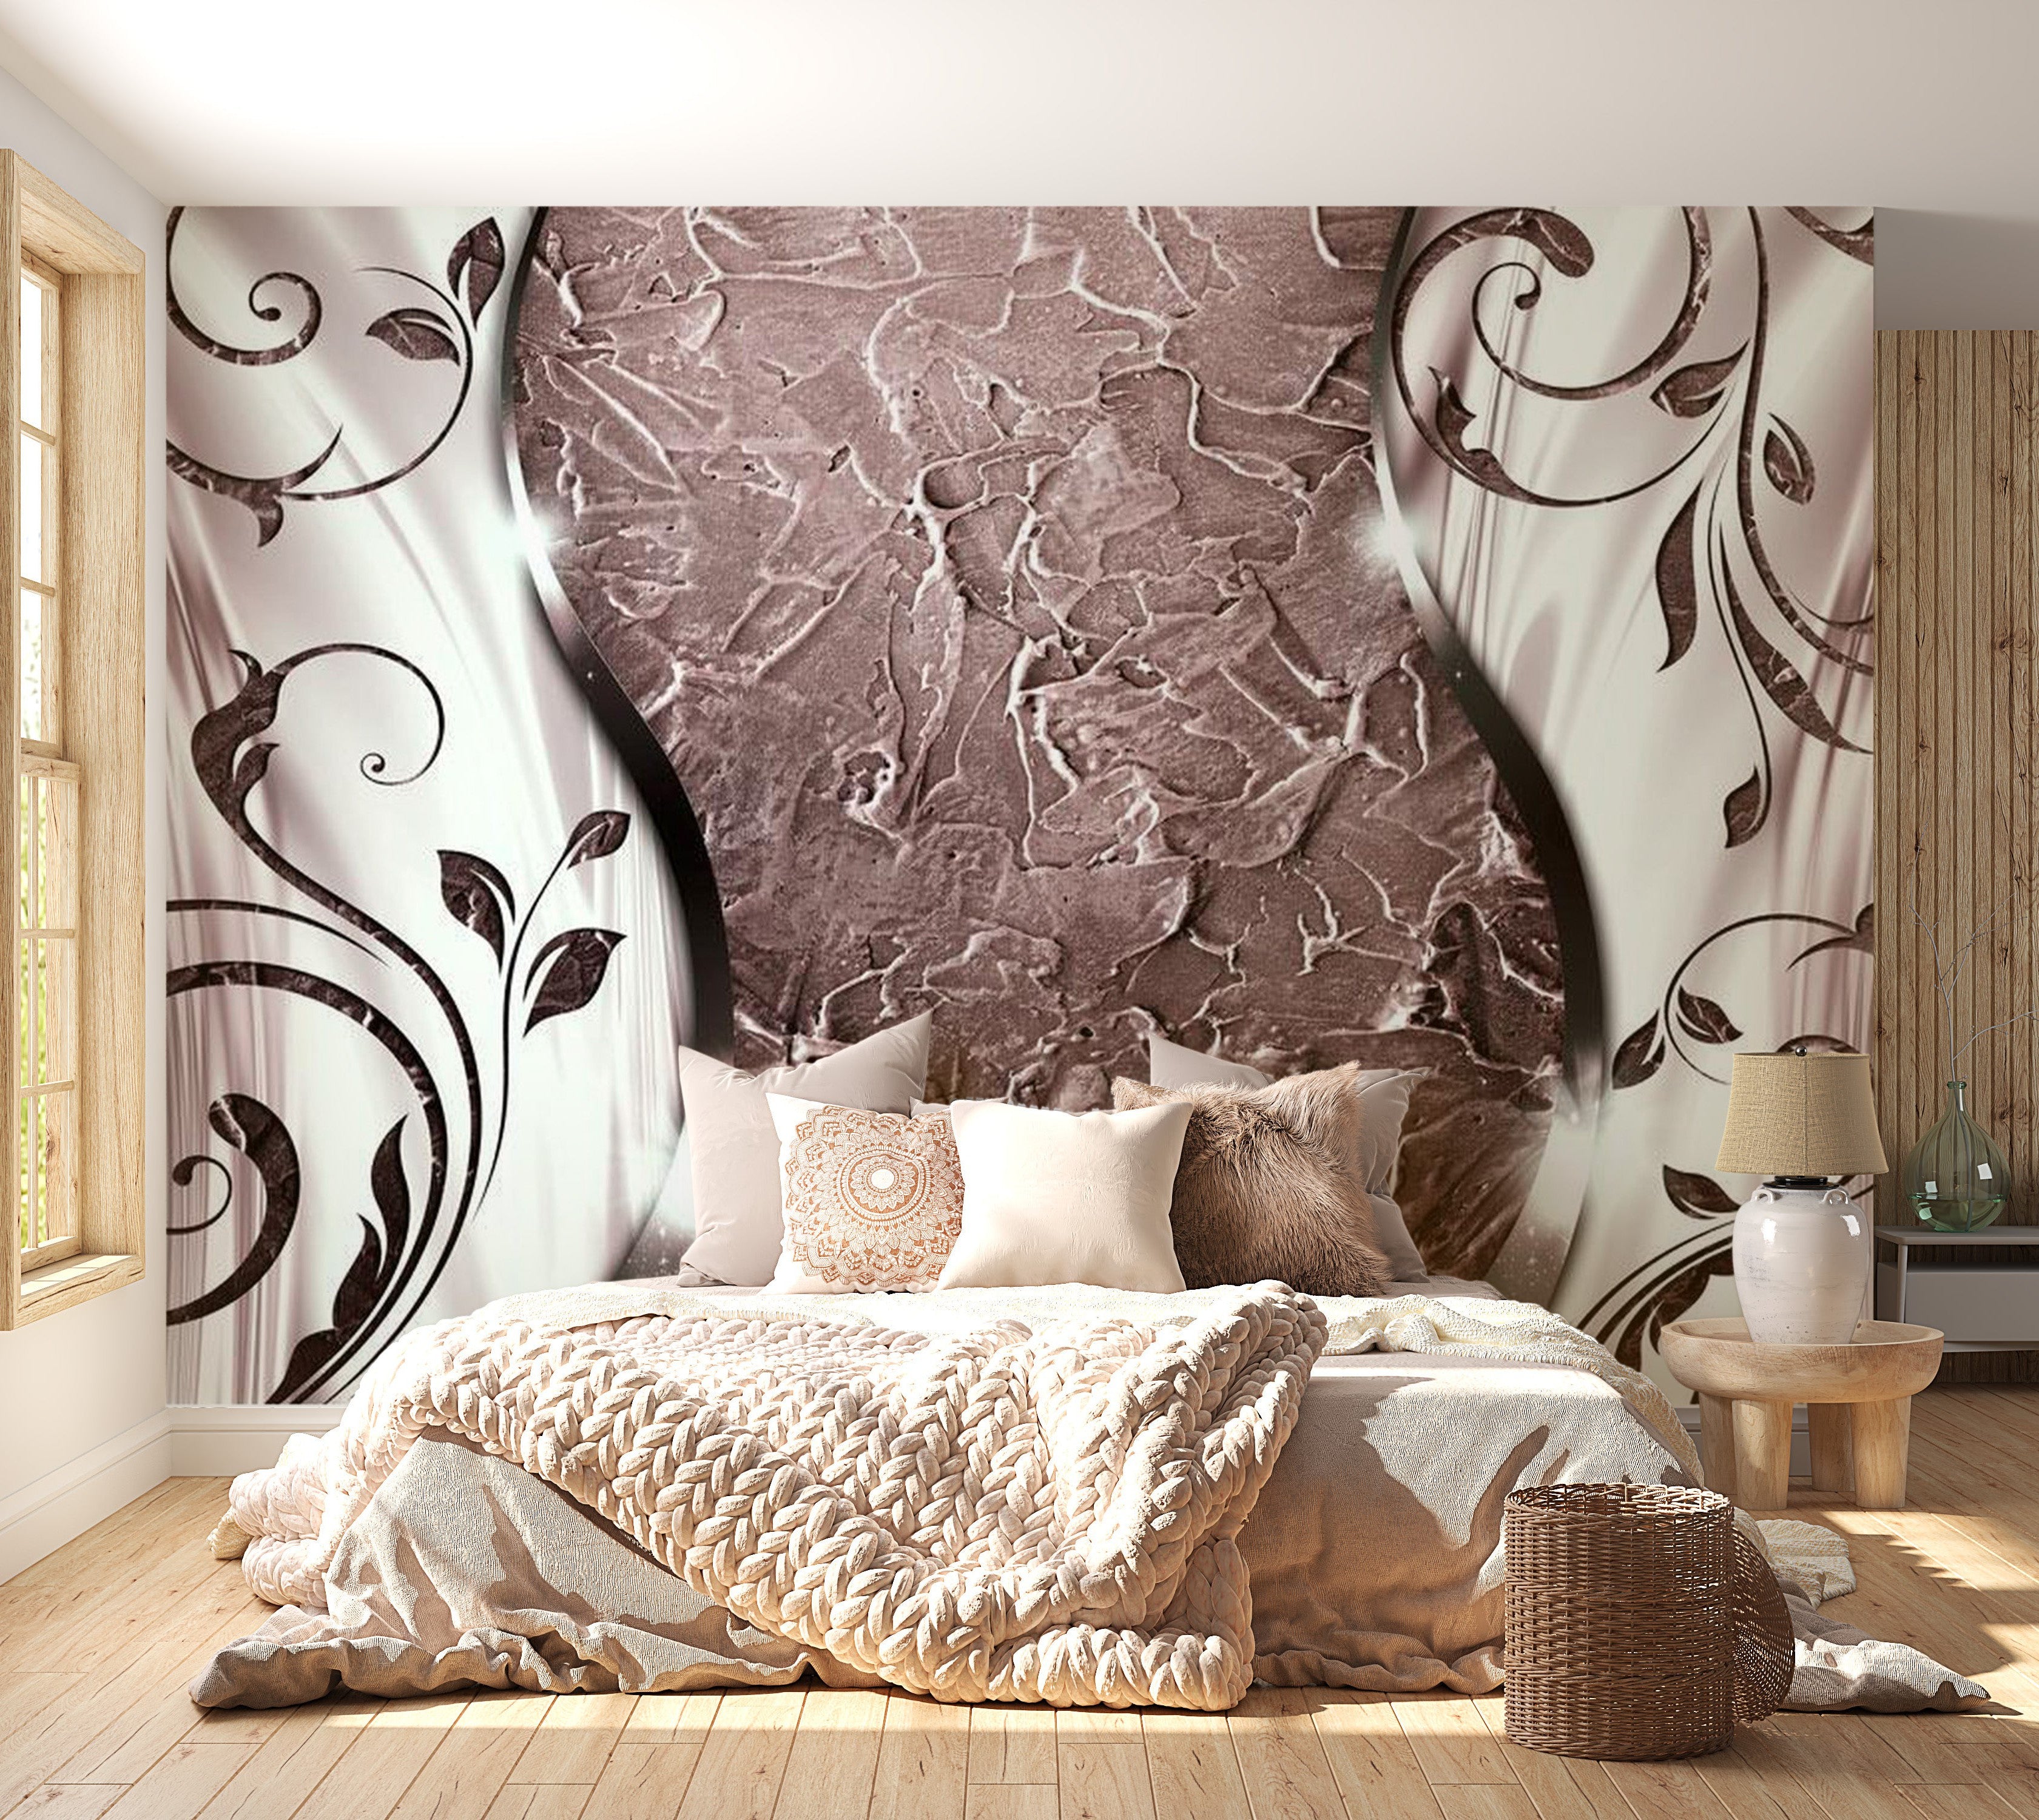 Peel & Stick Glam Wall Mural - Lyrical Reverie - Removable Wall Decals